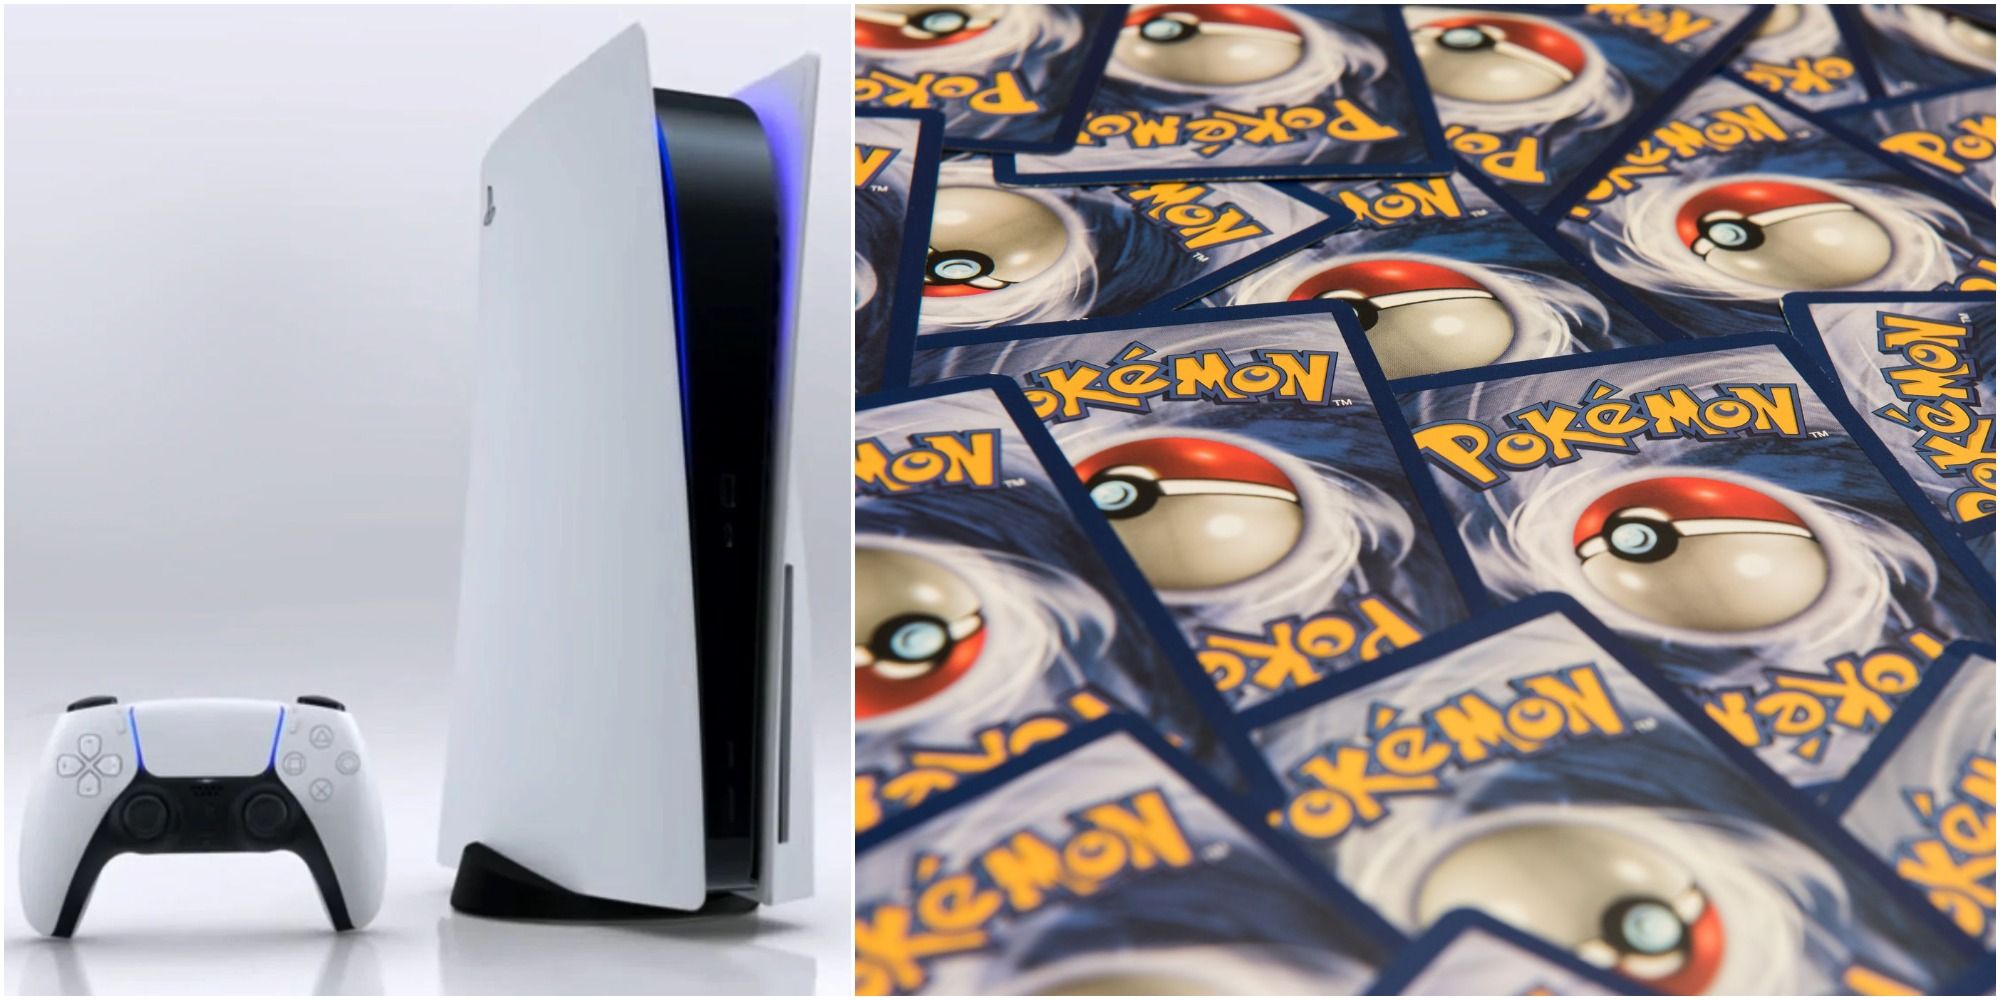 ps5 and pokemon cards